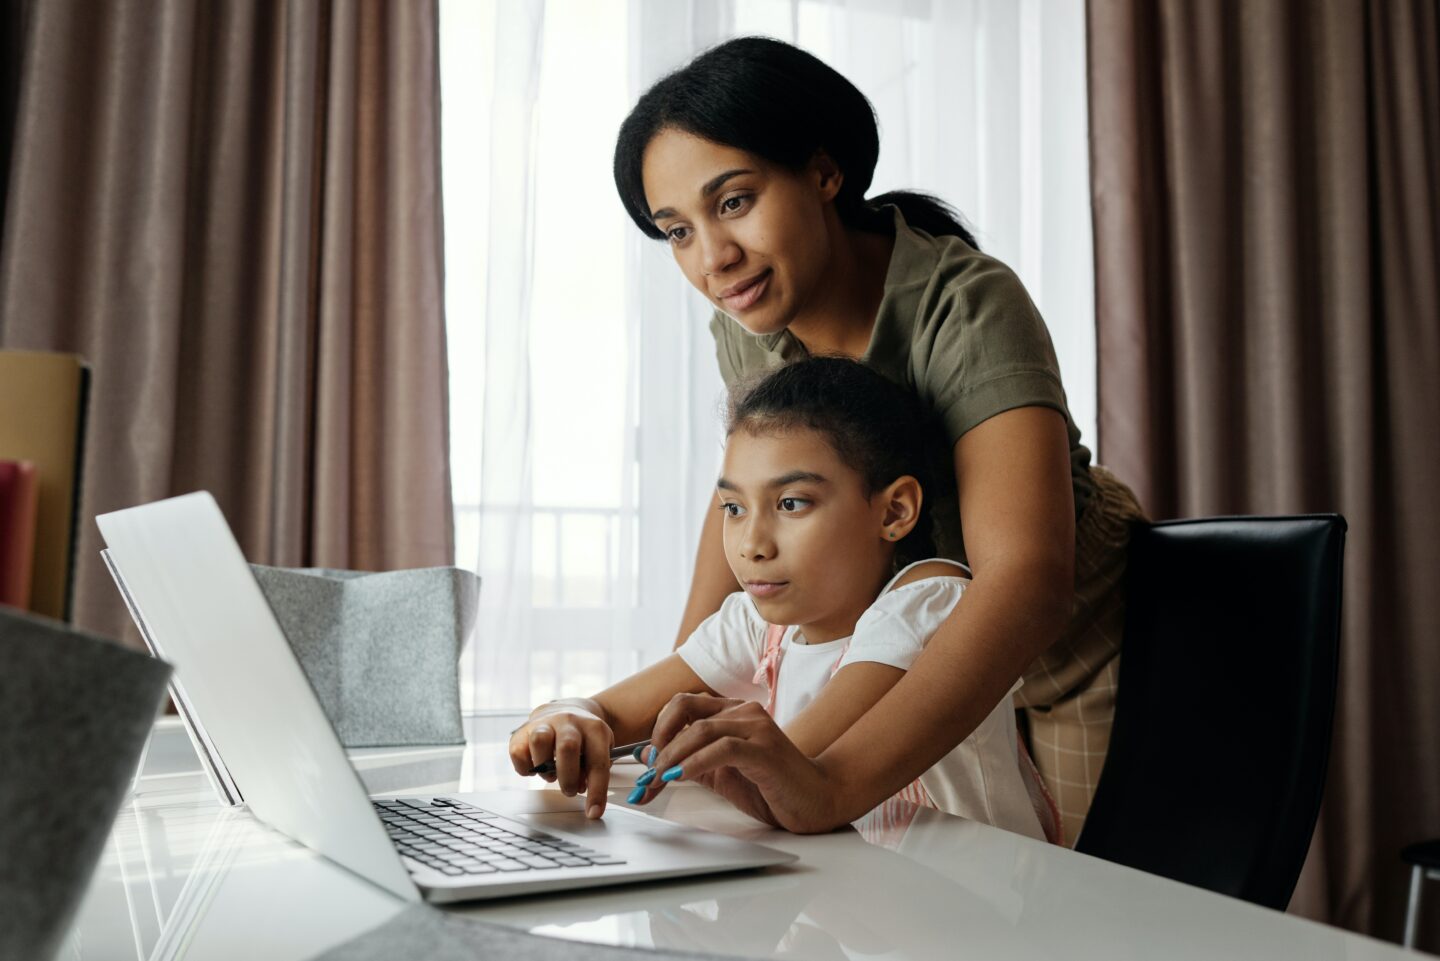 Child and parent work on laptop together